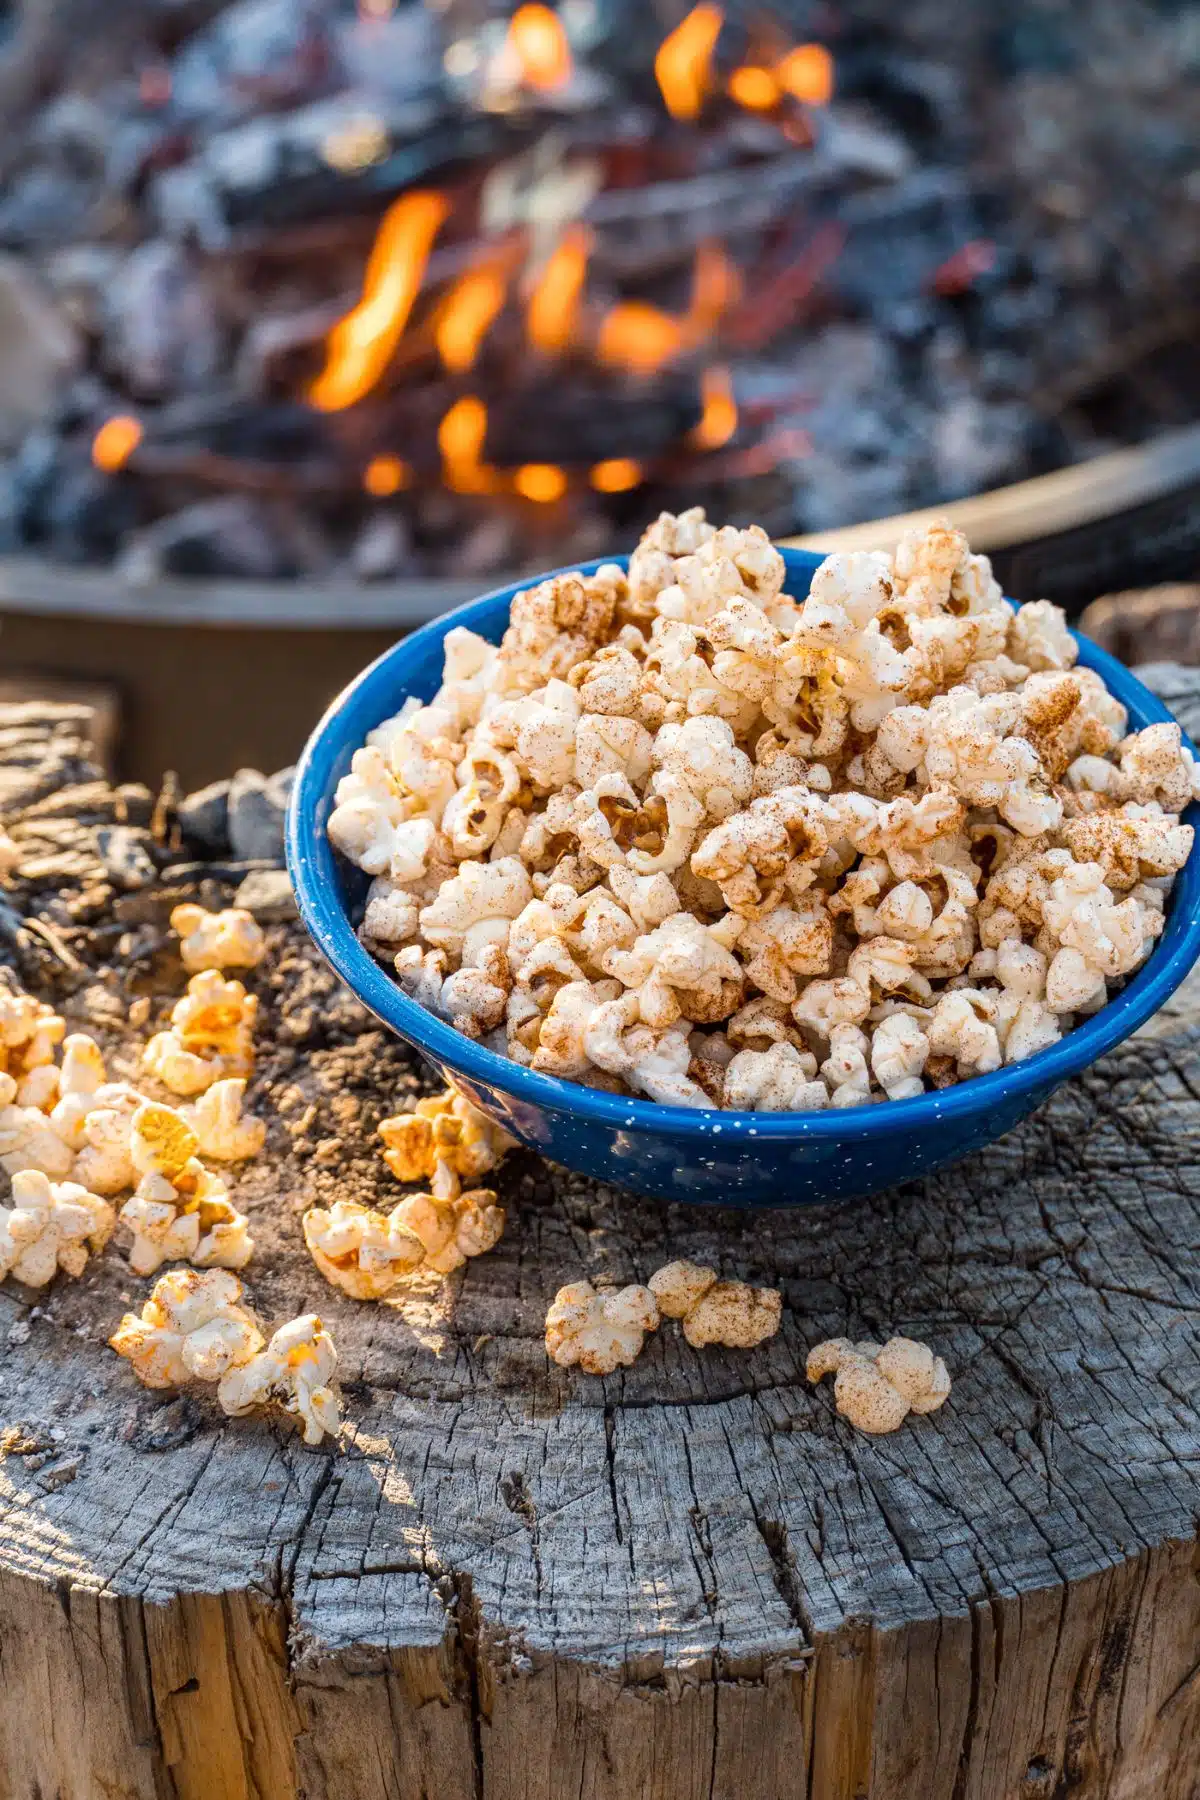 Popcorn in a blue bowl with a campfire in the background.